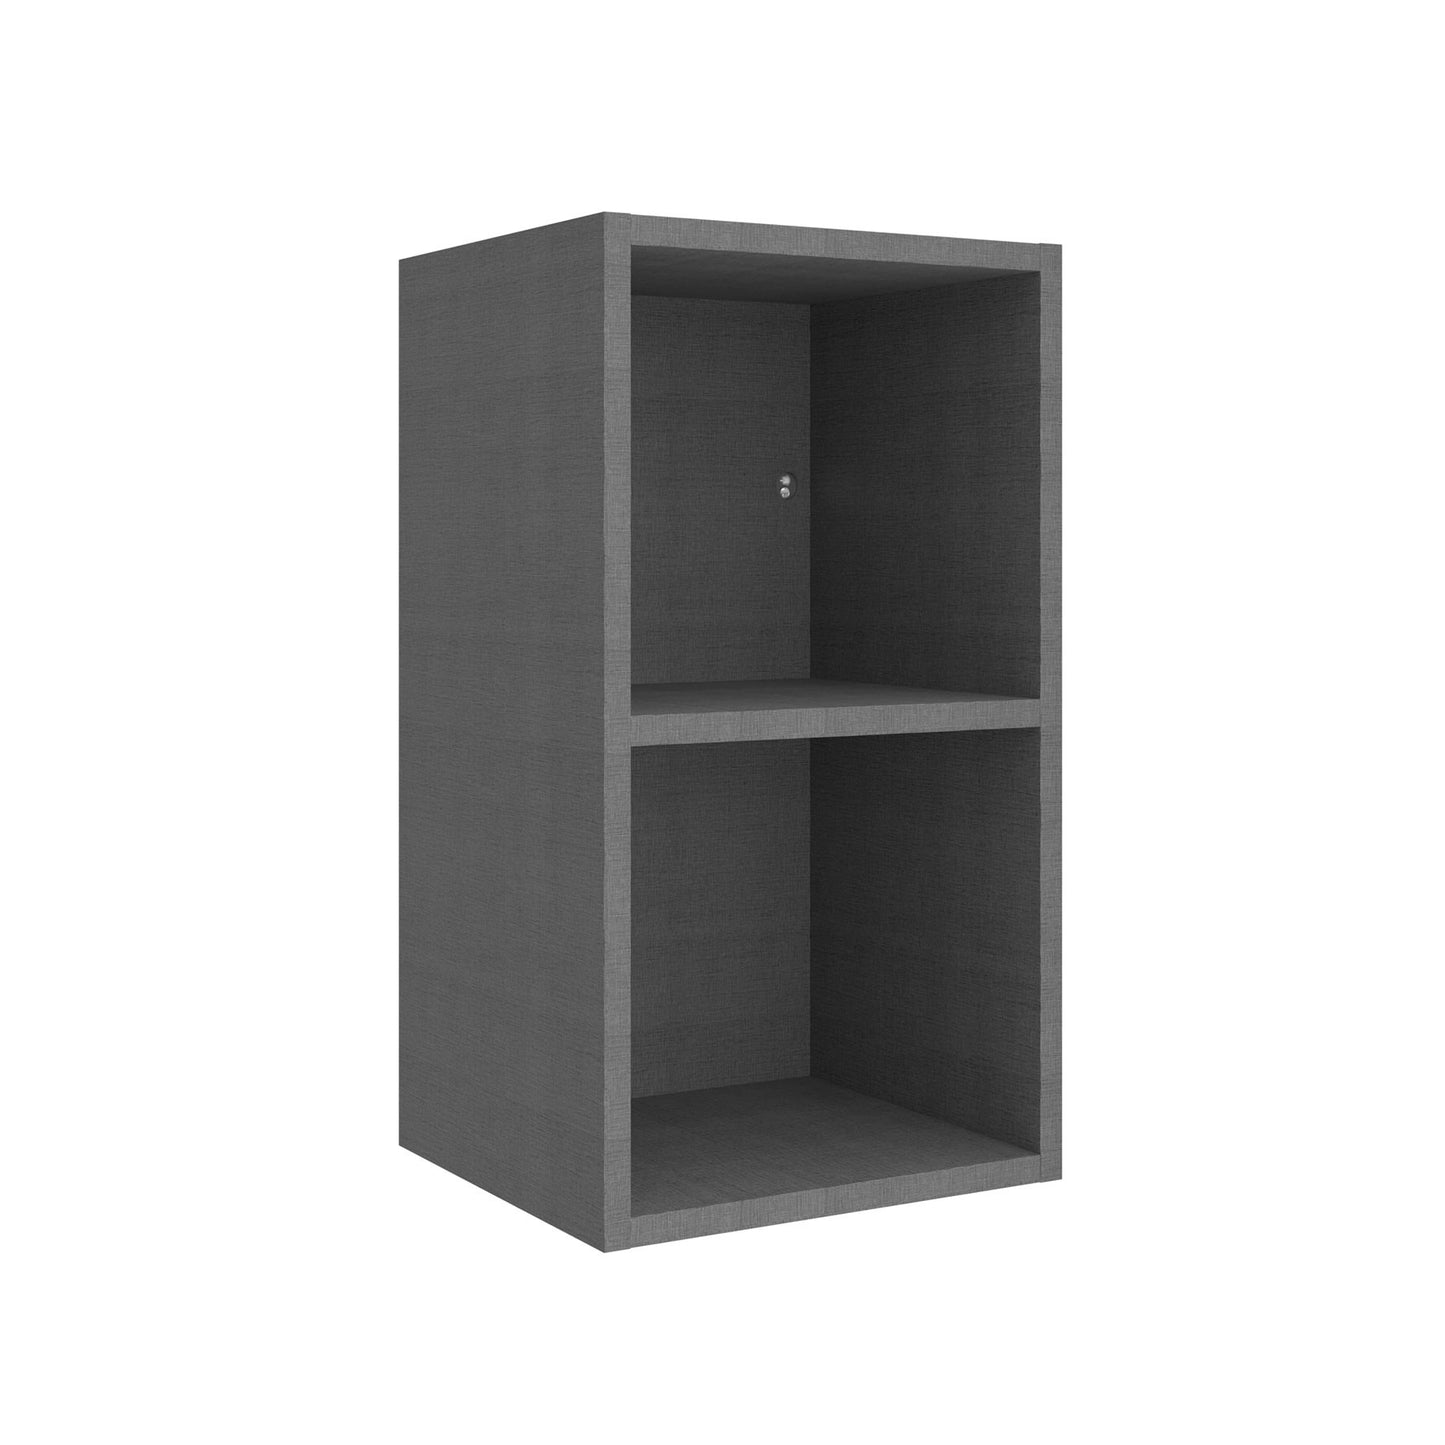 Wall-hung storage unit Alliance 12 inches (300) 2 spaces Carbon-Tx